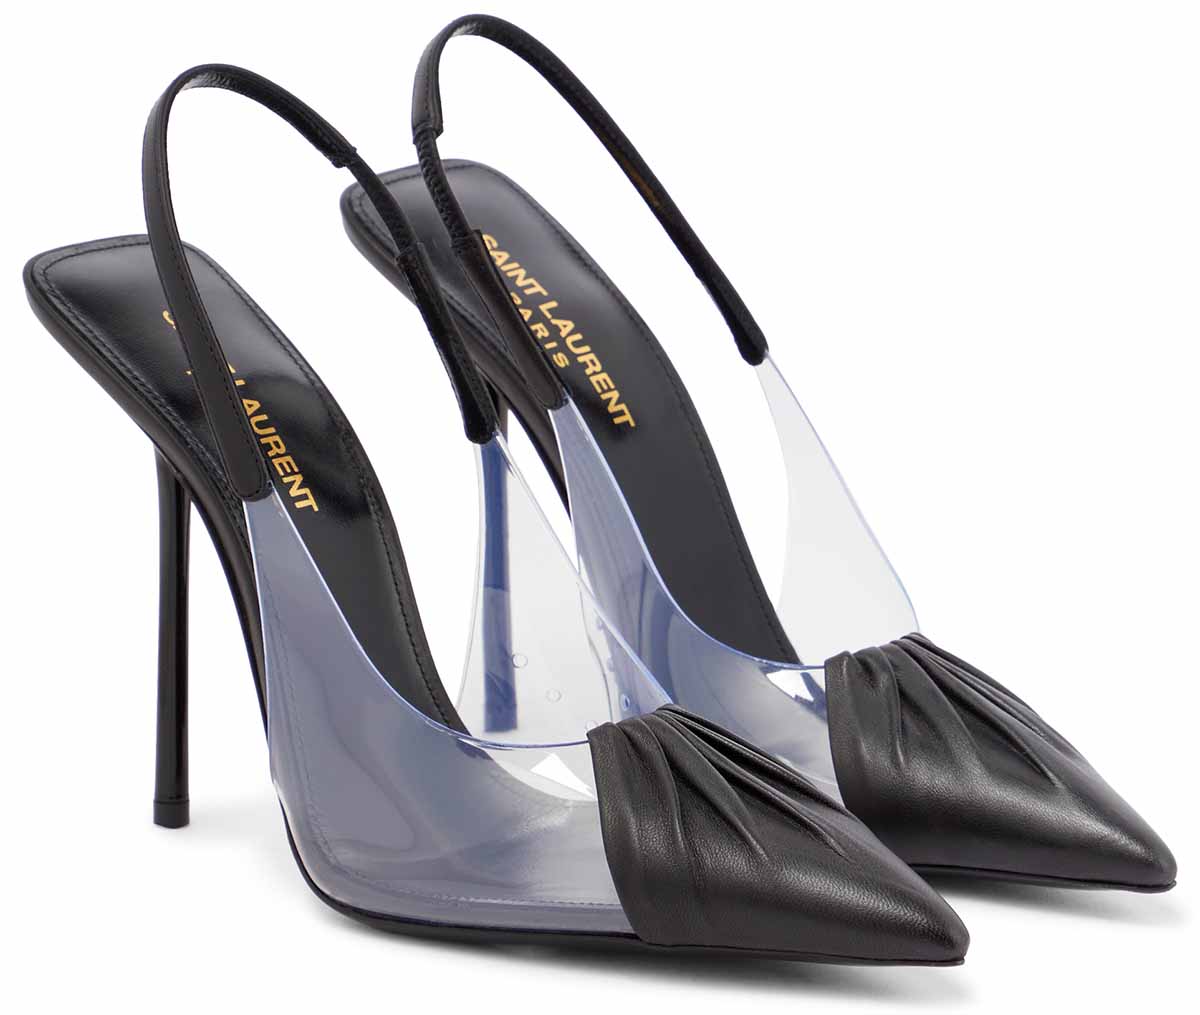 he Chica slingback pumps have ruched leather toe caps and clear PVC side panels